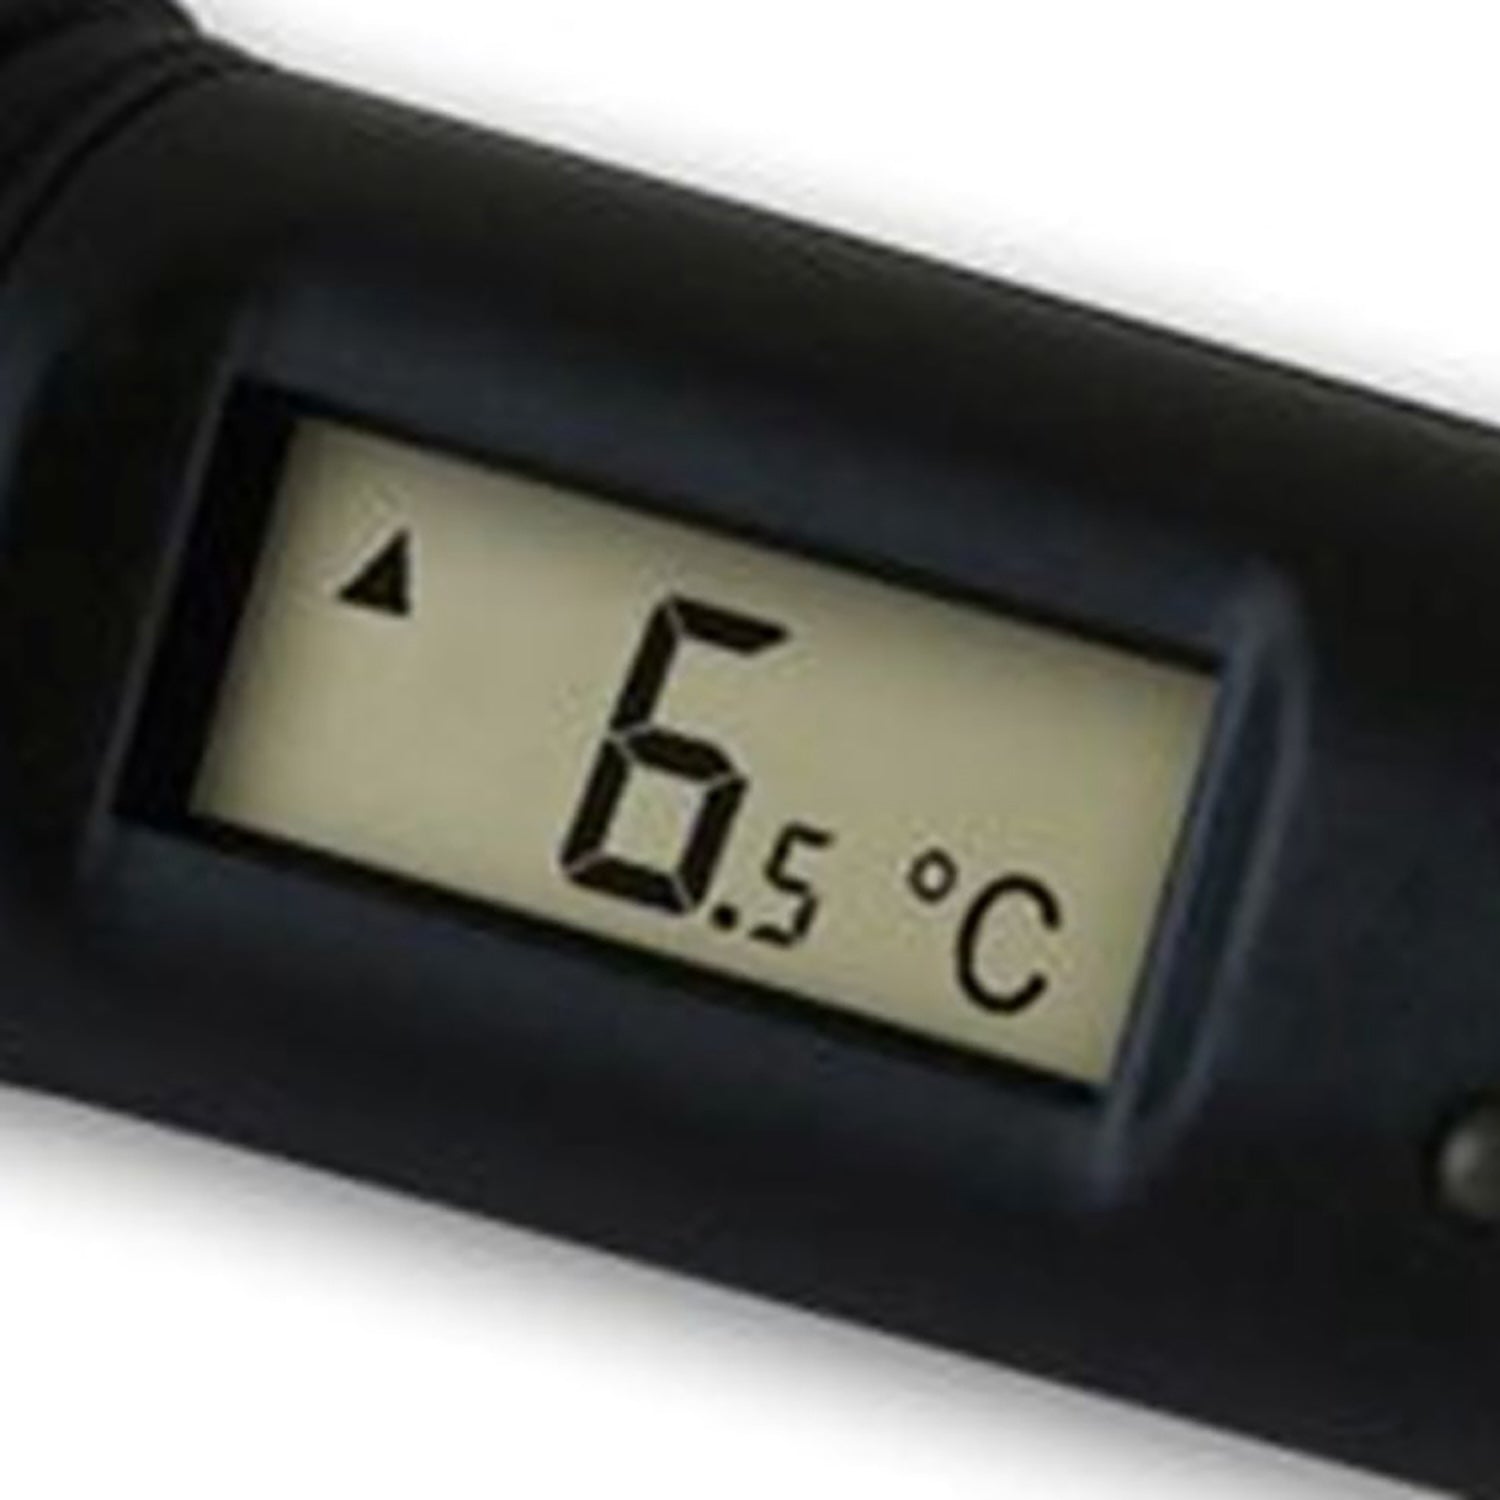 ATMDL-LCD - Calibrated USB Temperature Data Logger with LCD display (2)